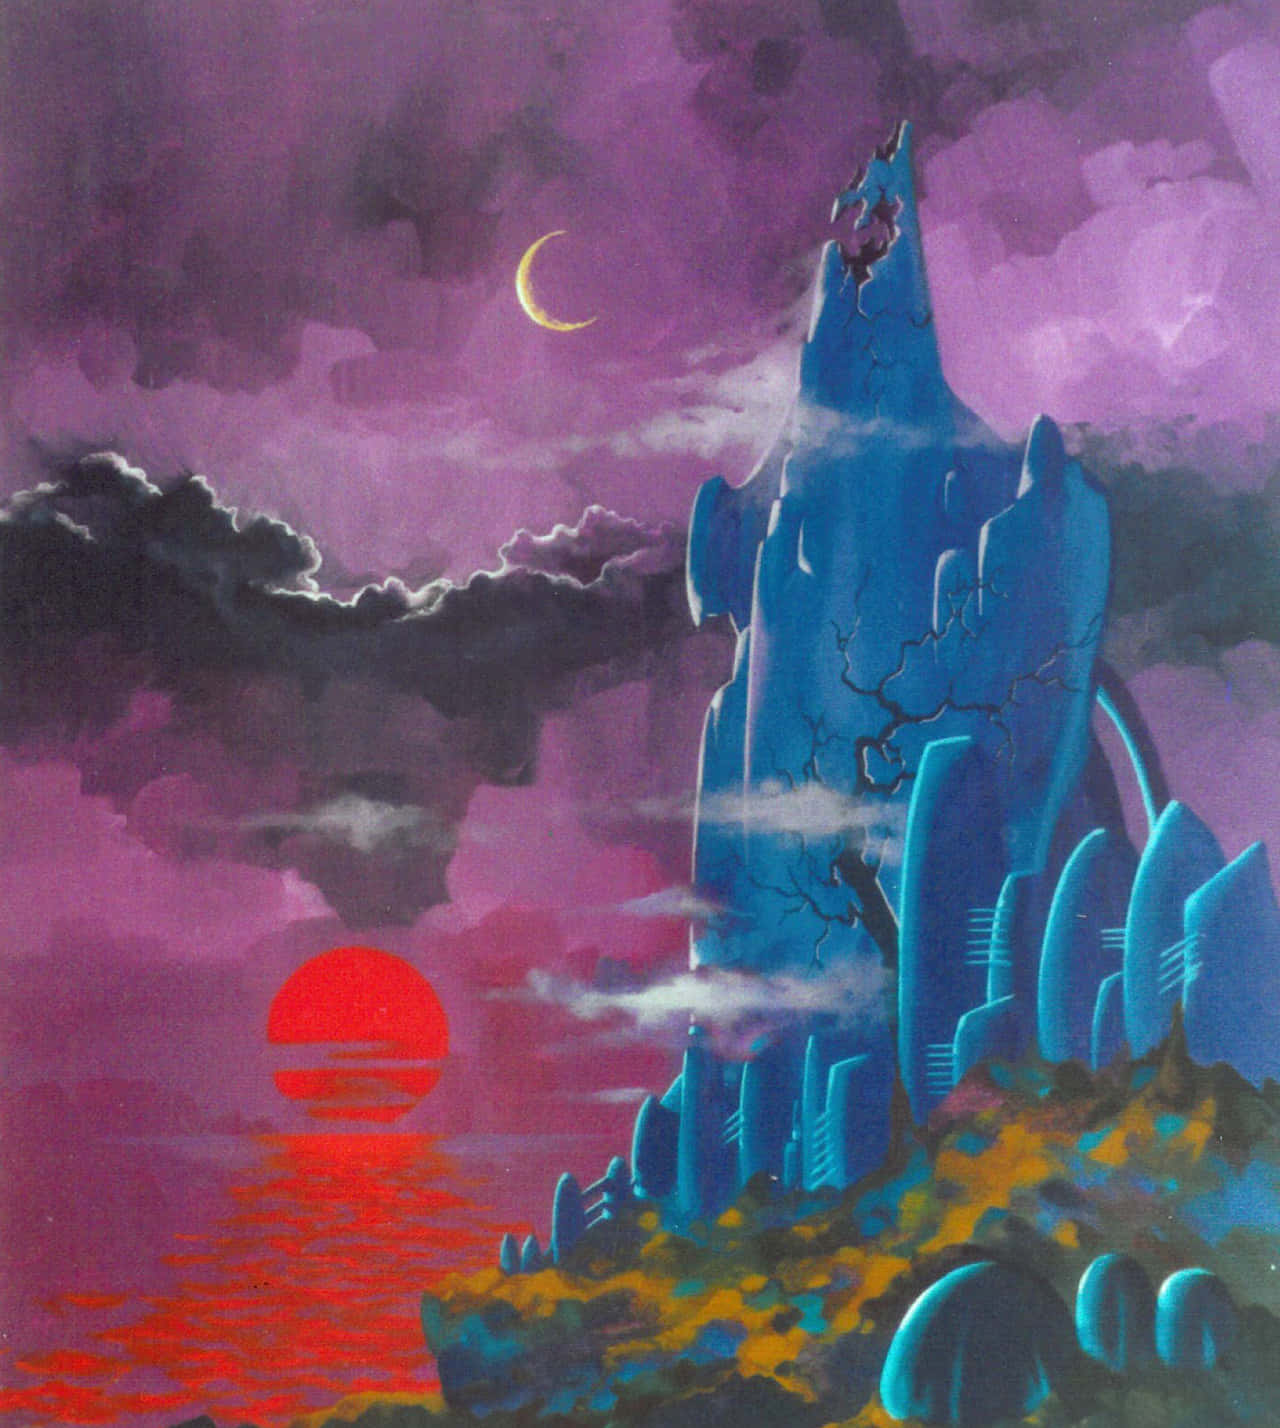 A Painting Of A Castle With A Moon And Stars